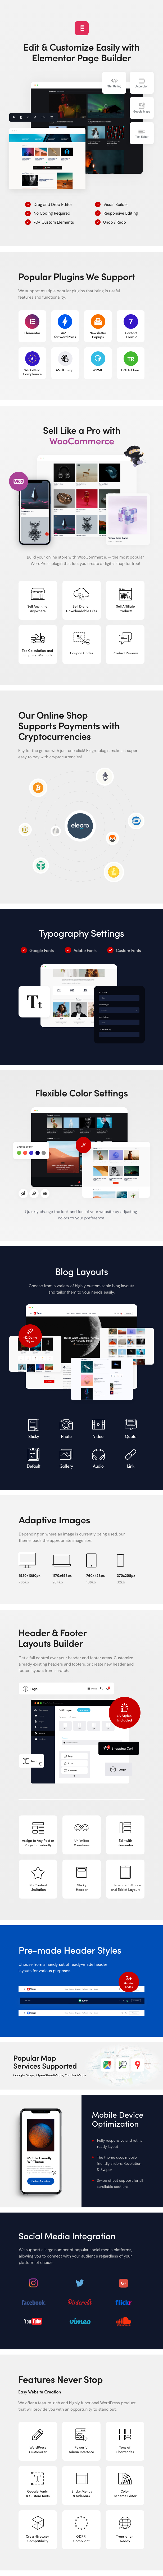 A lot of different pages of tuber video blog & podcast wordpress theme.